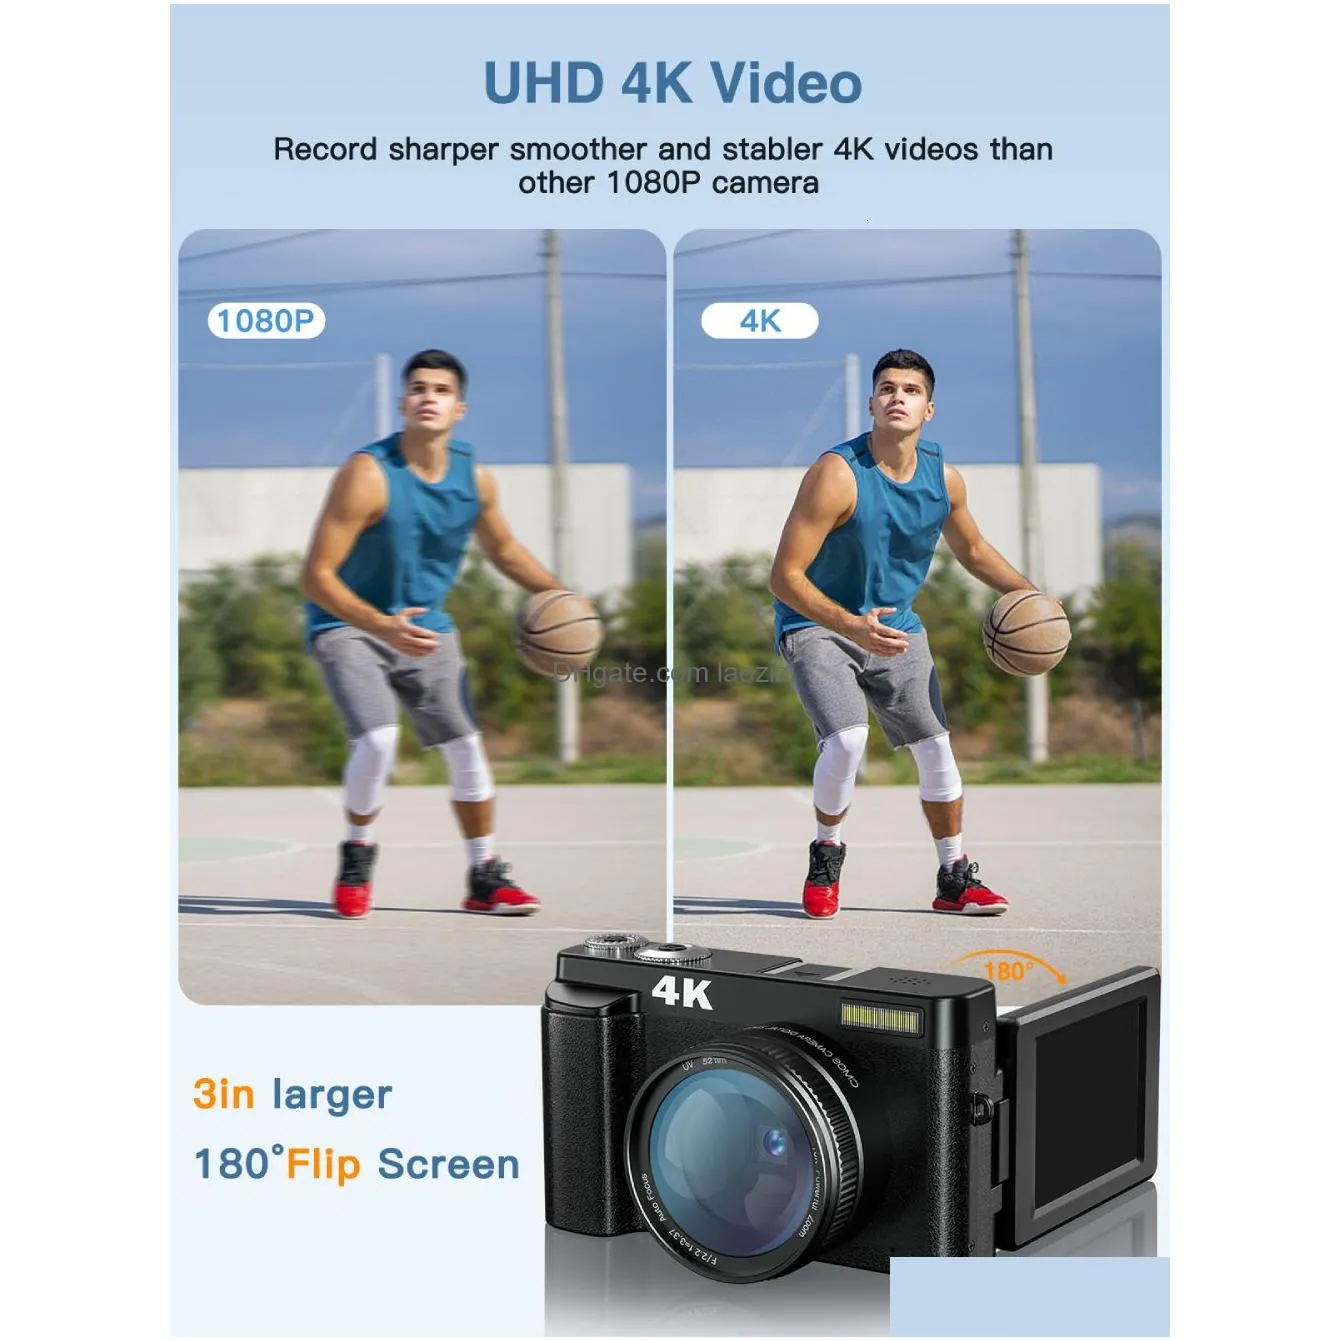 digital cameras 4k camera for pography and video autofocus antishake 48mp compact vlogging 3 180ﾰ flip screen with flash 230830